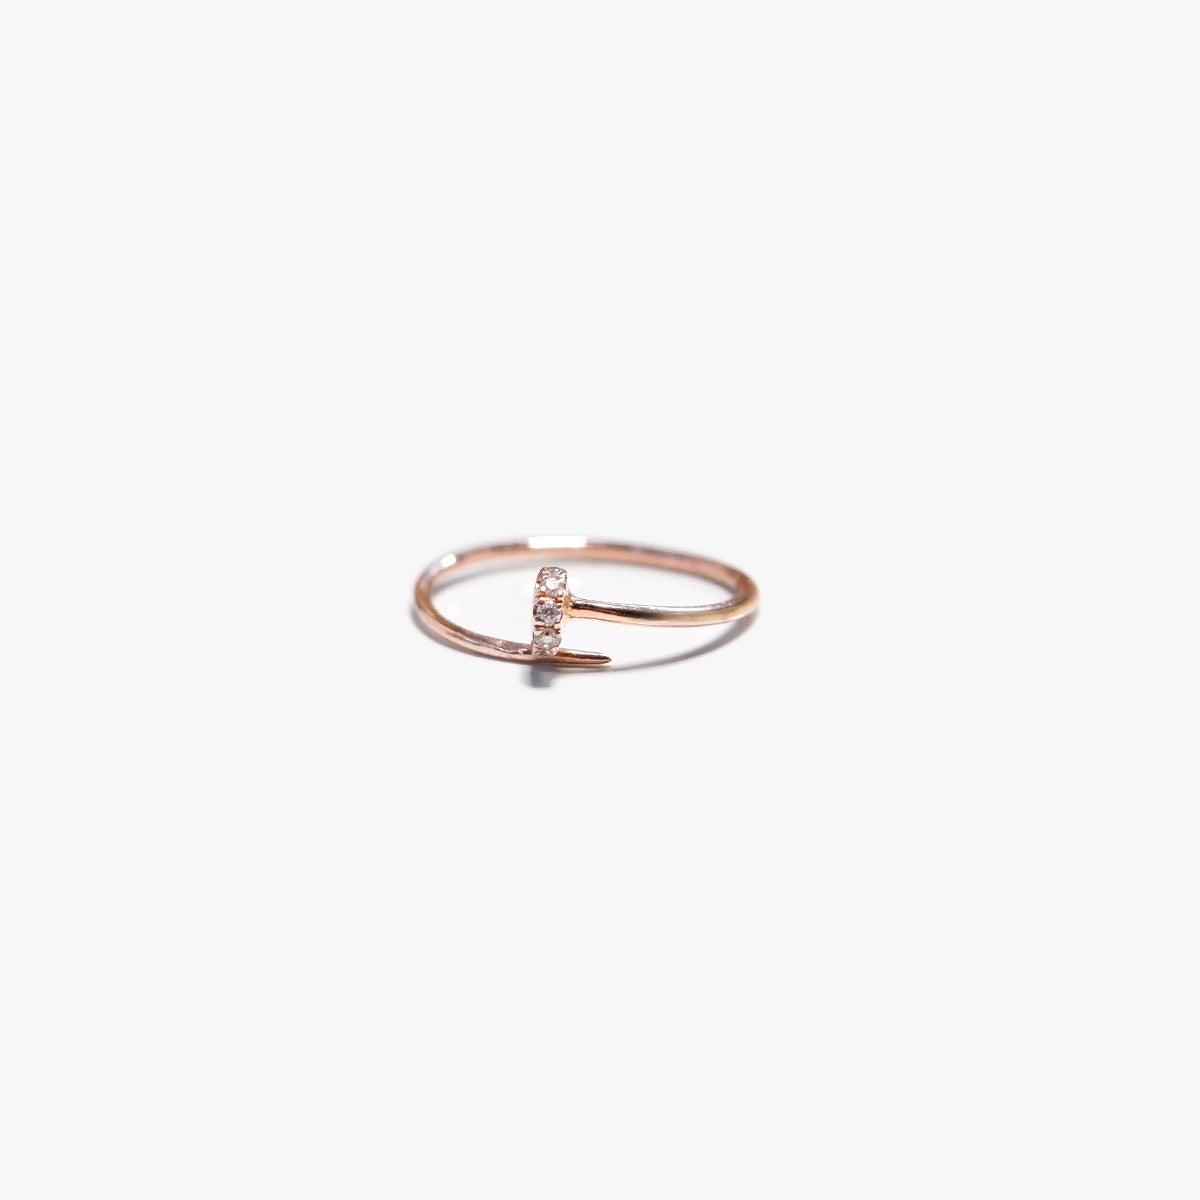 The Diamond Nail Ring in Solid Gold